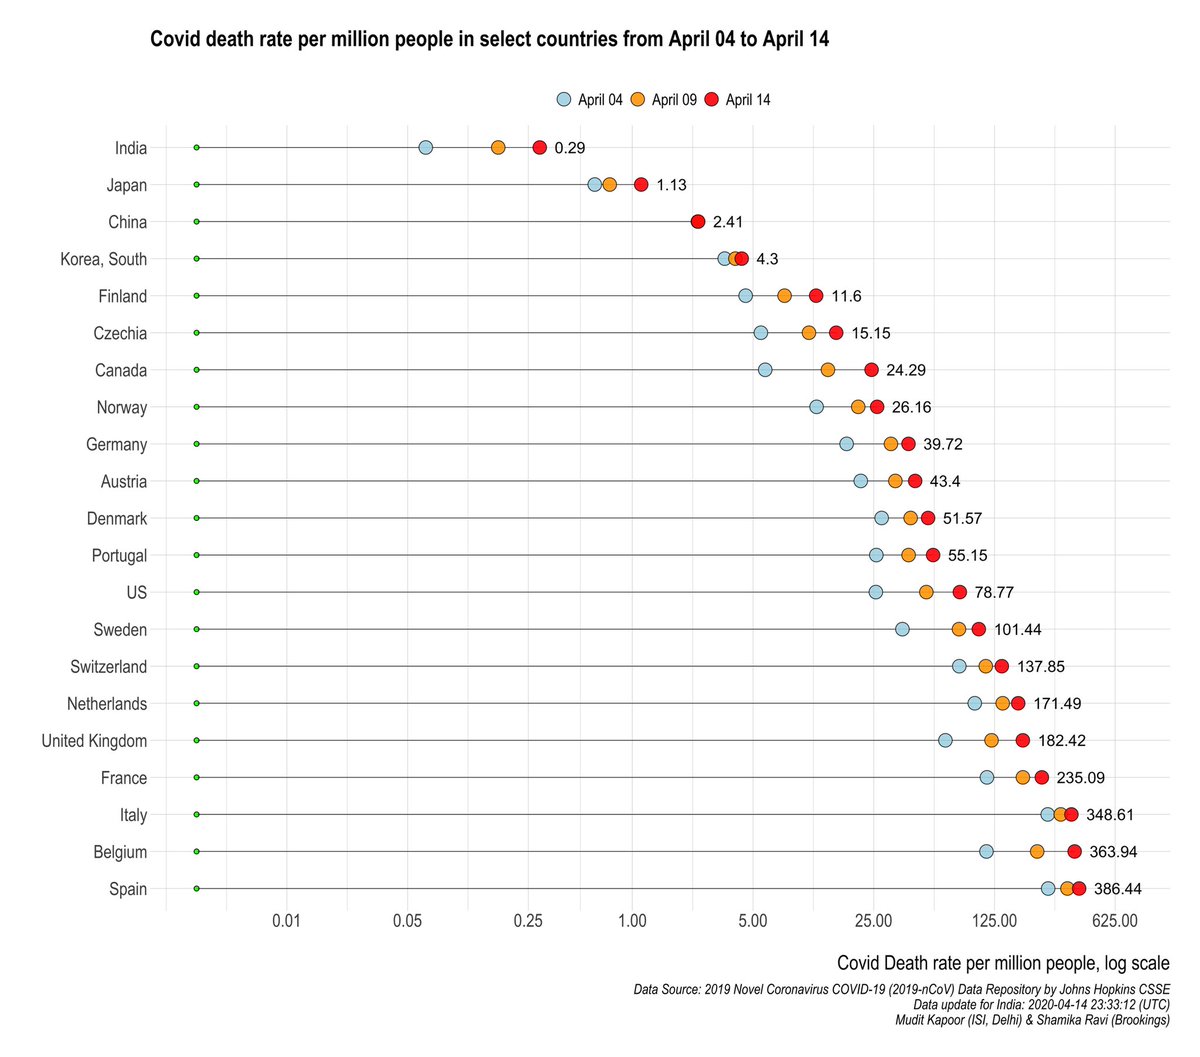 COVID death rate per million people:1) India is low (with low growth).2) Japan is low but growing.3) Belgium, UK, US: high yet growing.